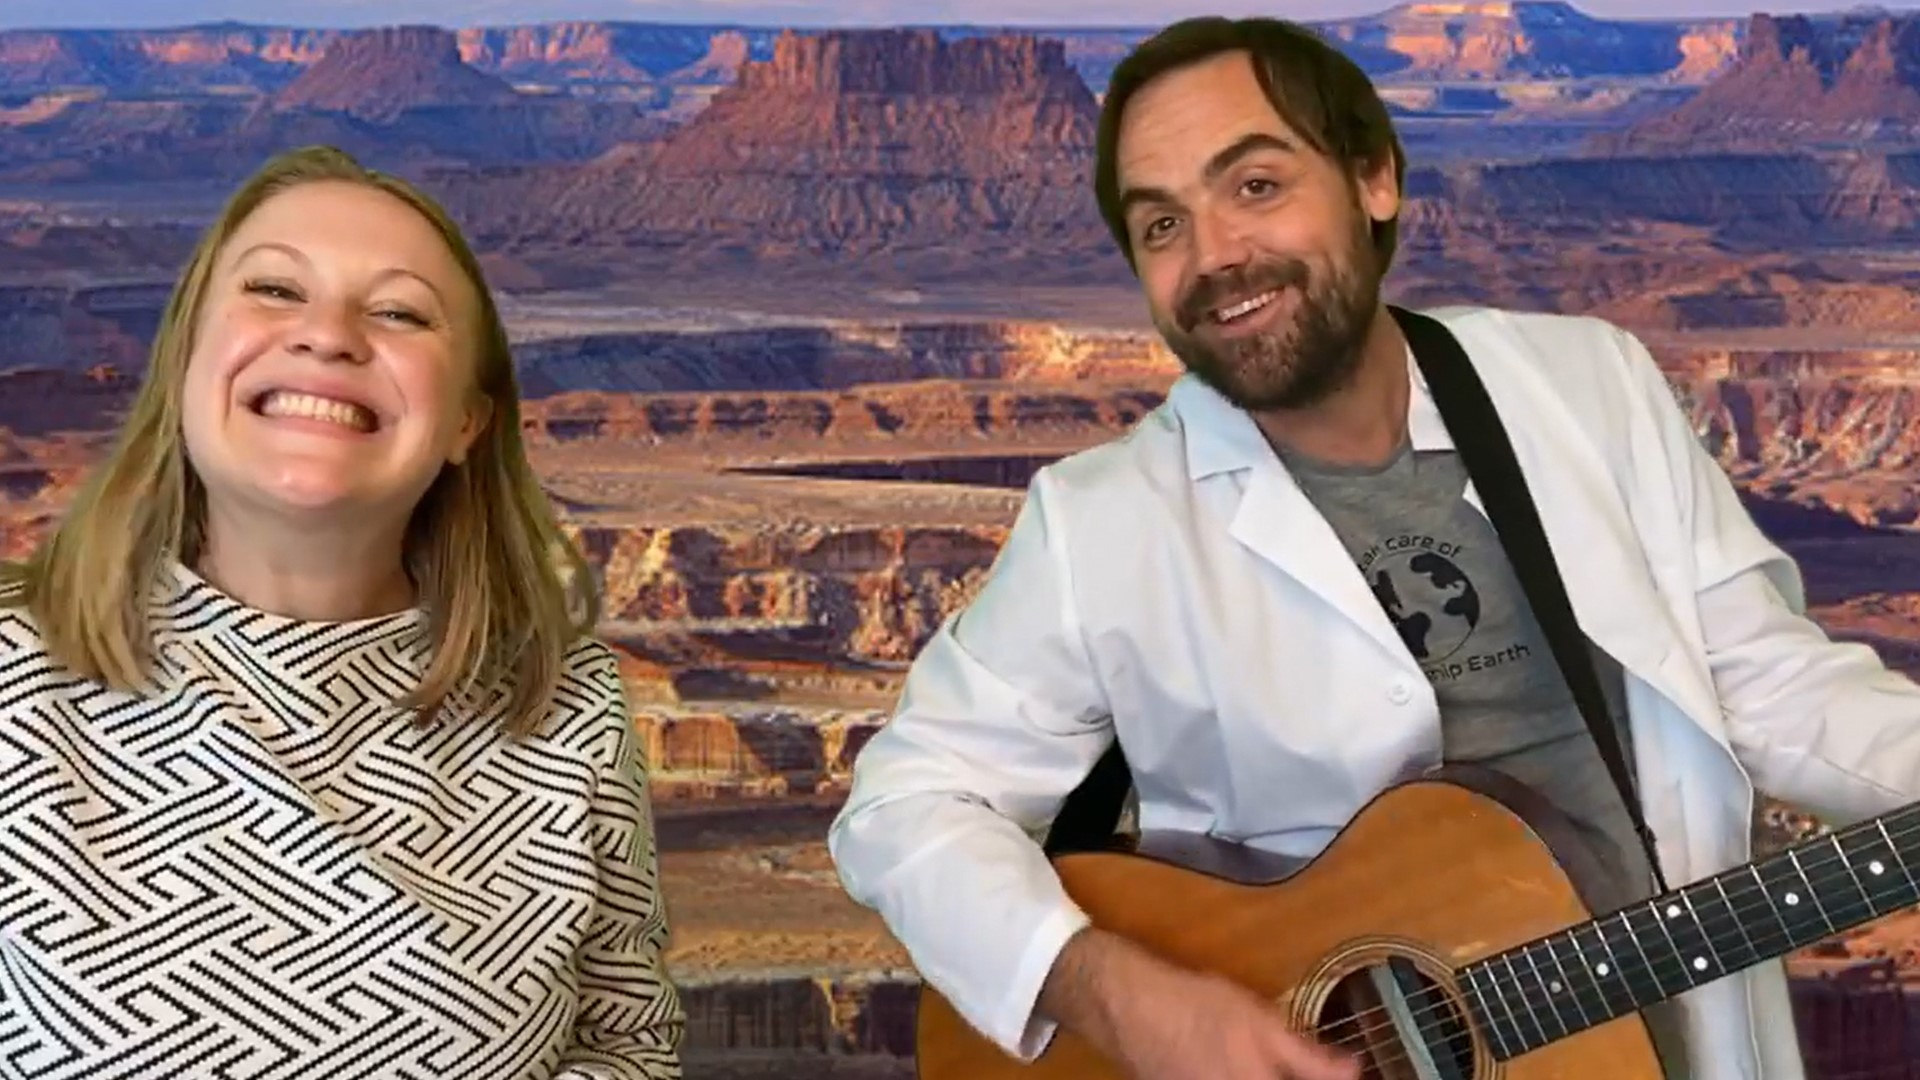 Mikey Gervais and Kaylee Colee stream 3 videos a week teaching kids through music